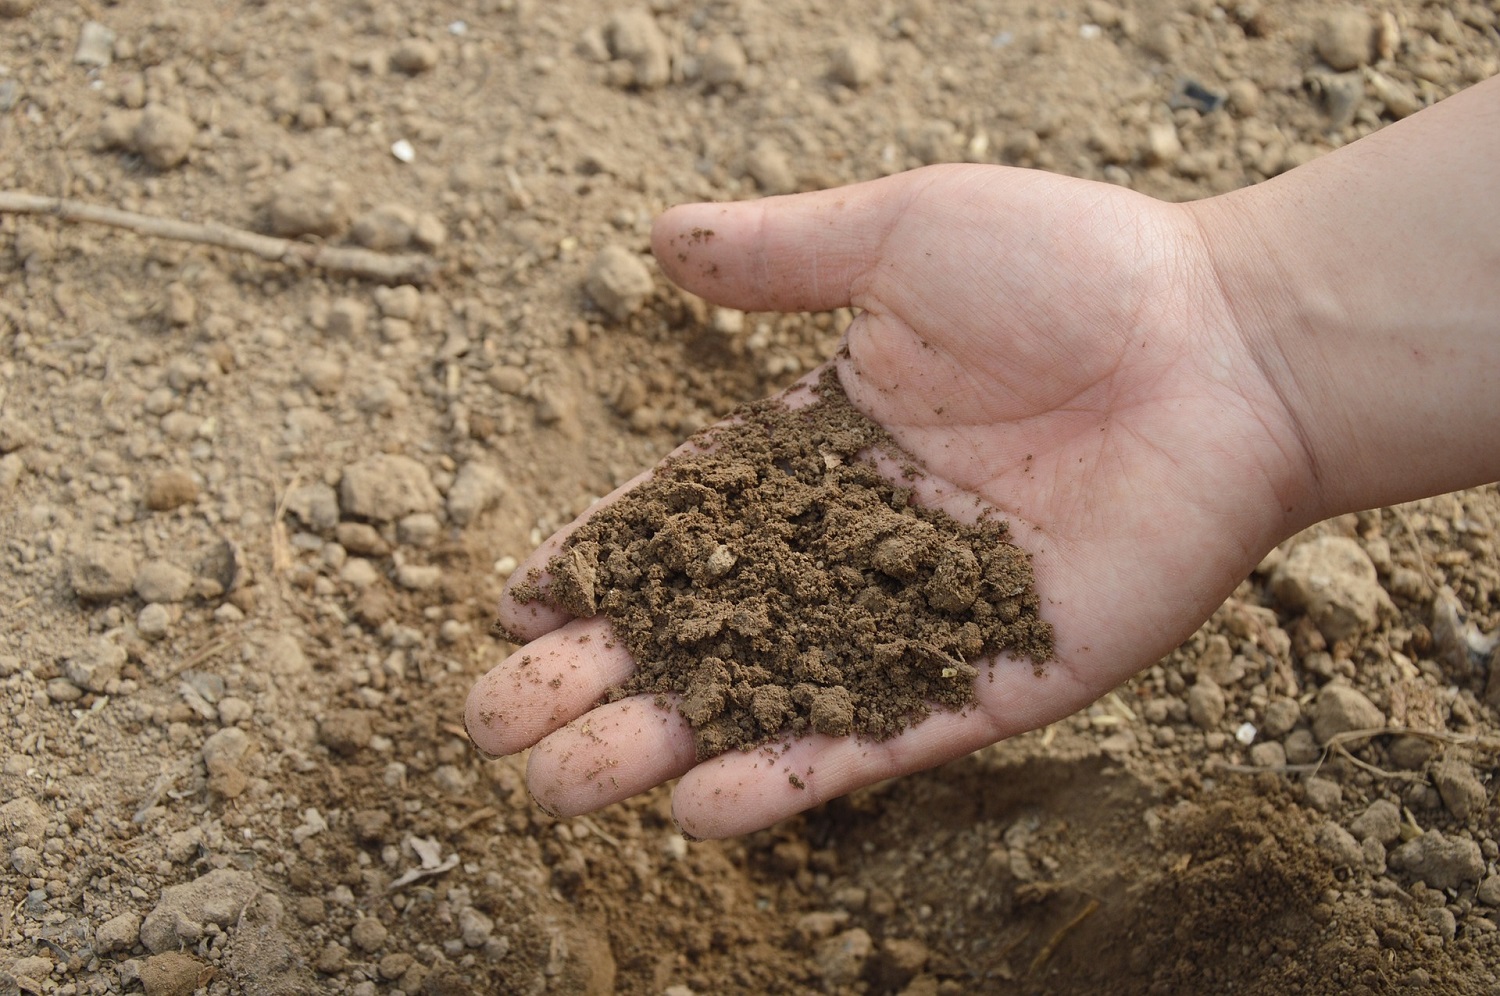 Recuperation of soil fertility - soil quality indicators for sustainable production